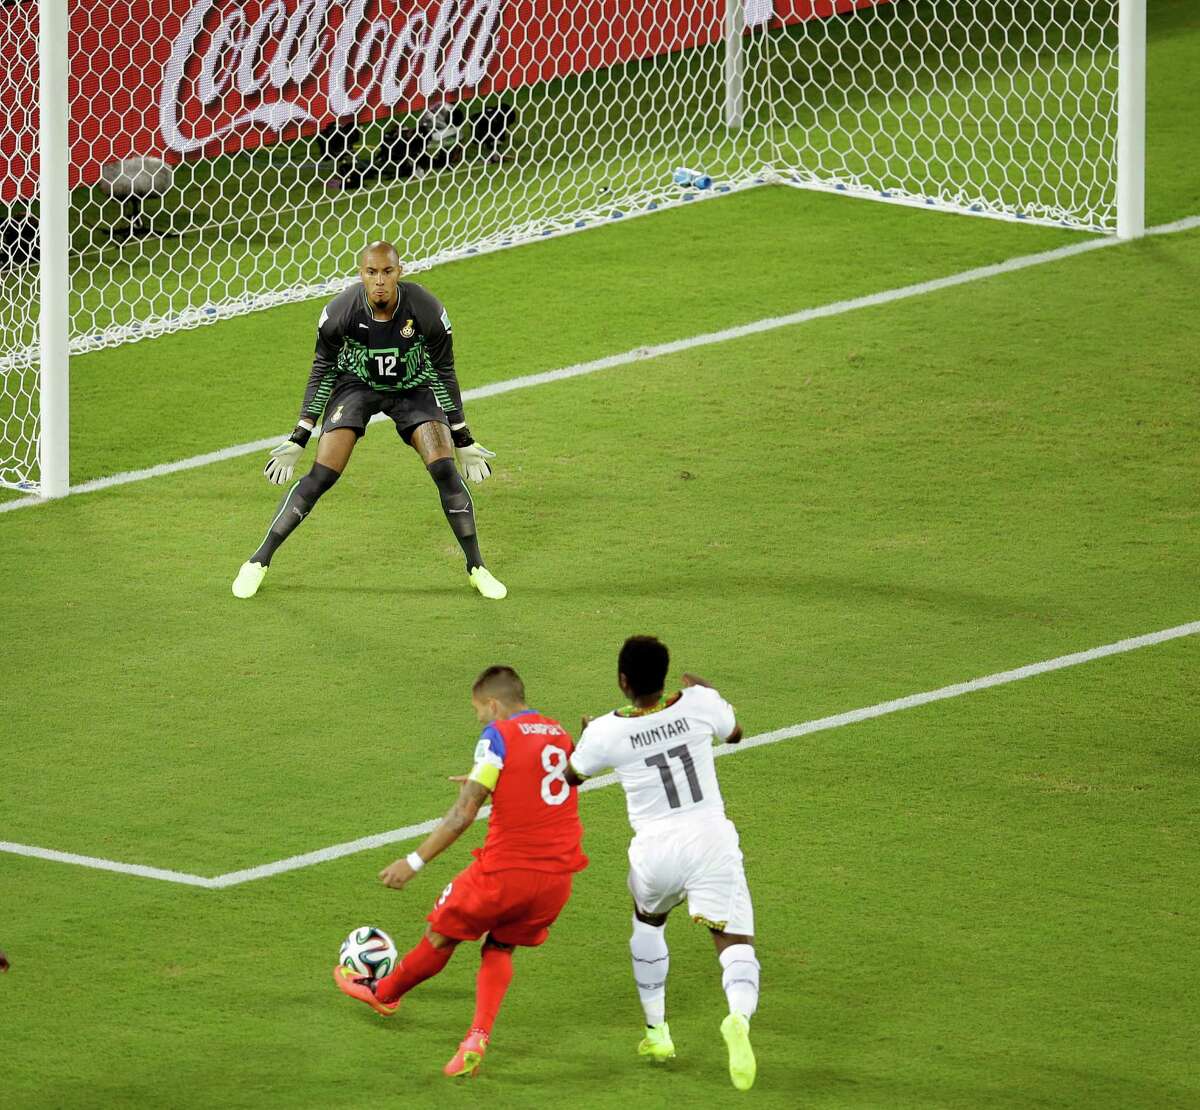 2) In the first game of the 2014 FIFA World Cup, Dempsey scored in the first 34 seconds against Ghana, making his goal the fastest in U.S. World Cup history.